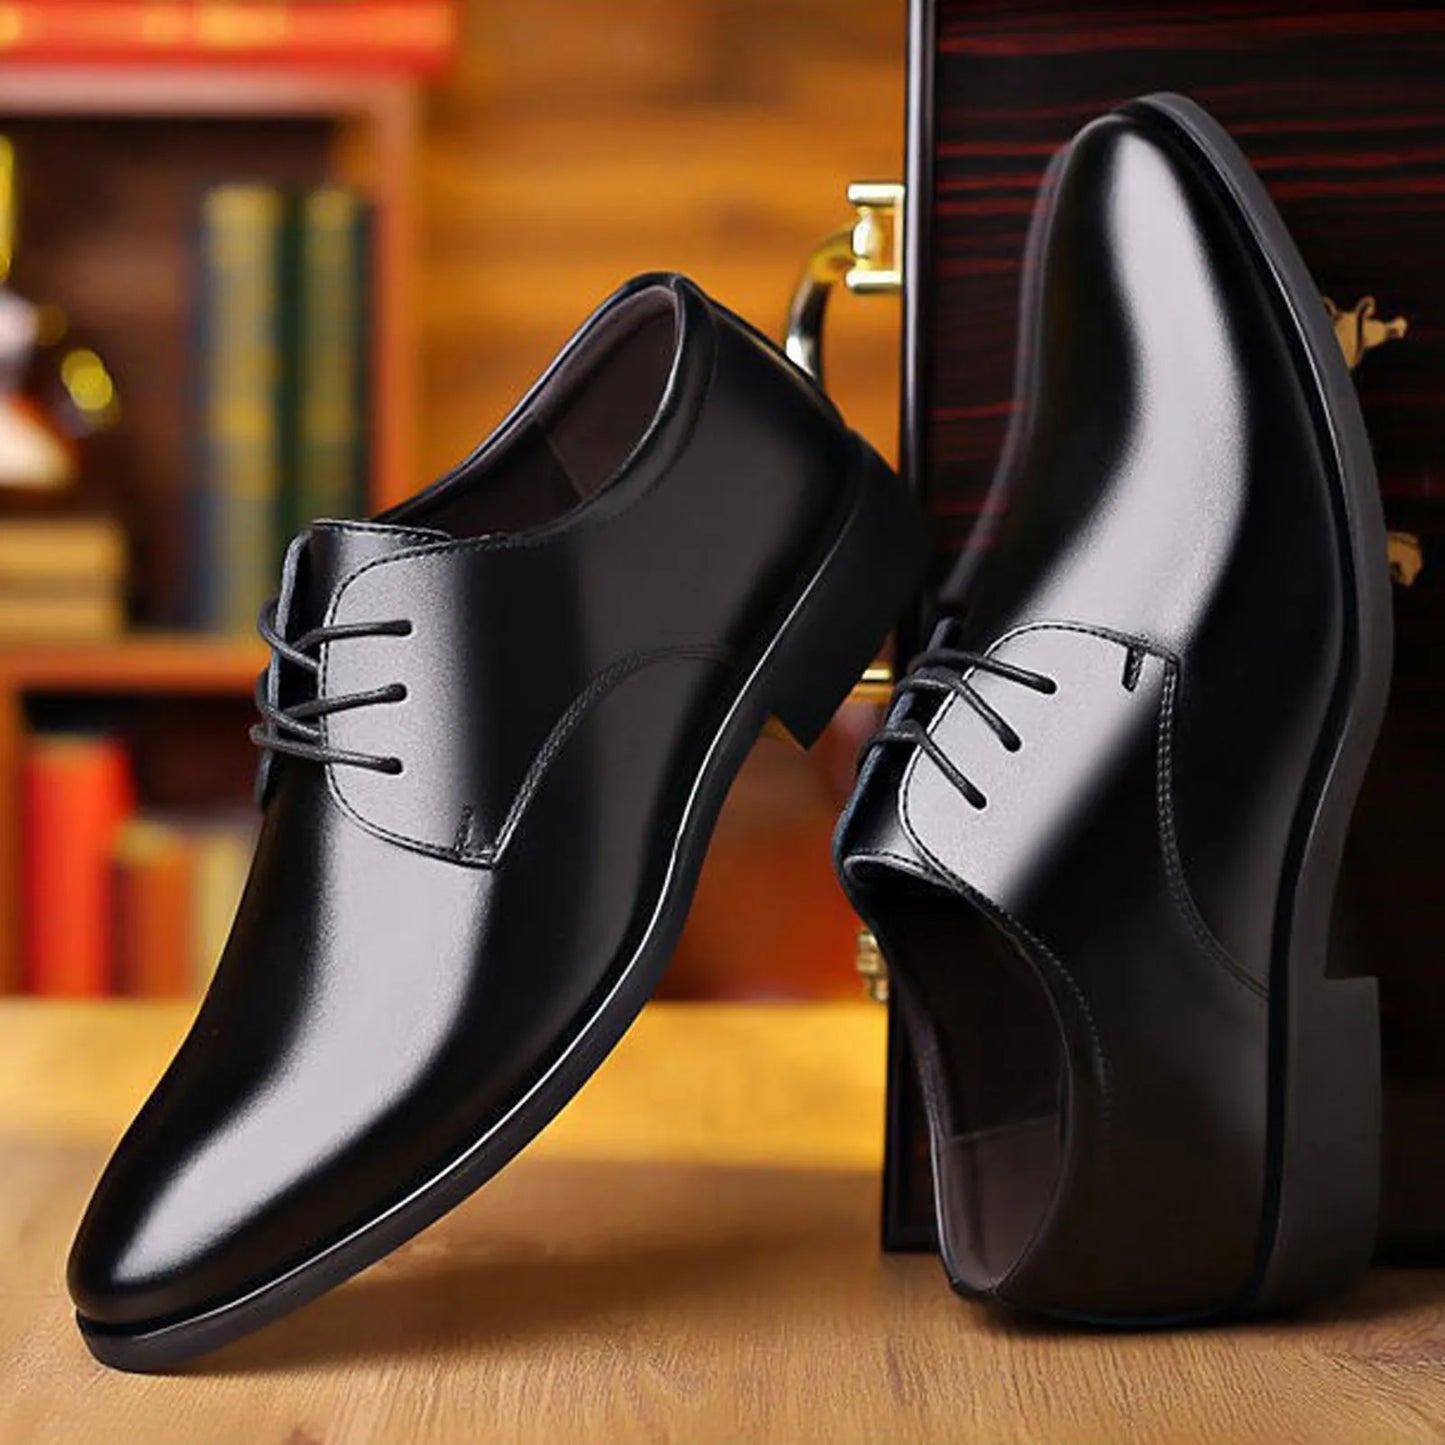 Men Shoes New Fashion Black Formal Party Slip-On Dress Leather Shoes Mens fashion Designer Business Casual Loafers